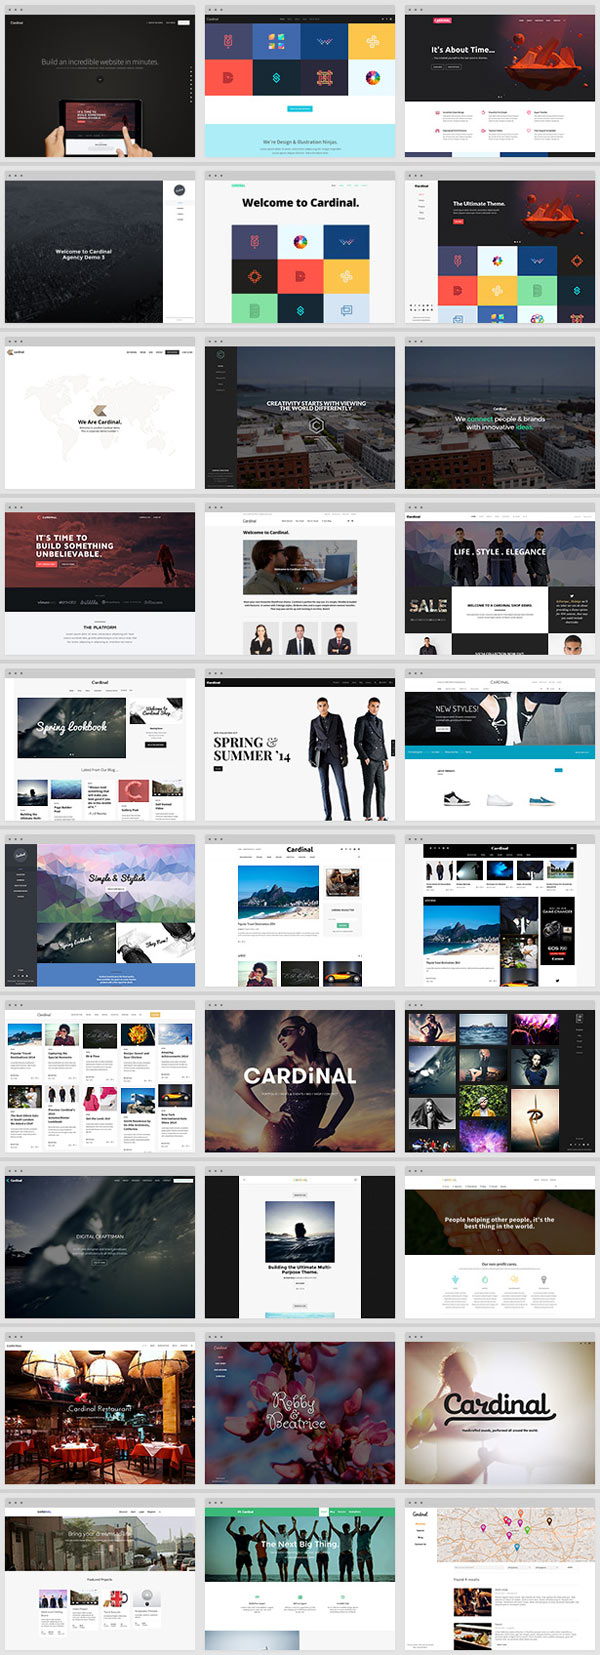 Cardinal WordPress theme, a responsive and Retina-ready WordPress theme with different designs for multi-purpose.